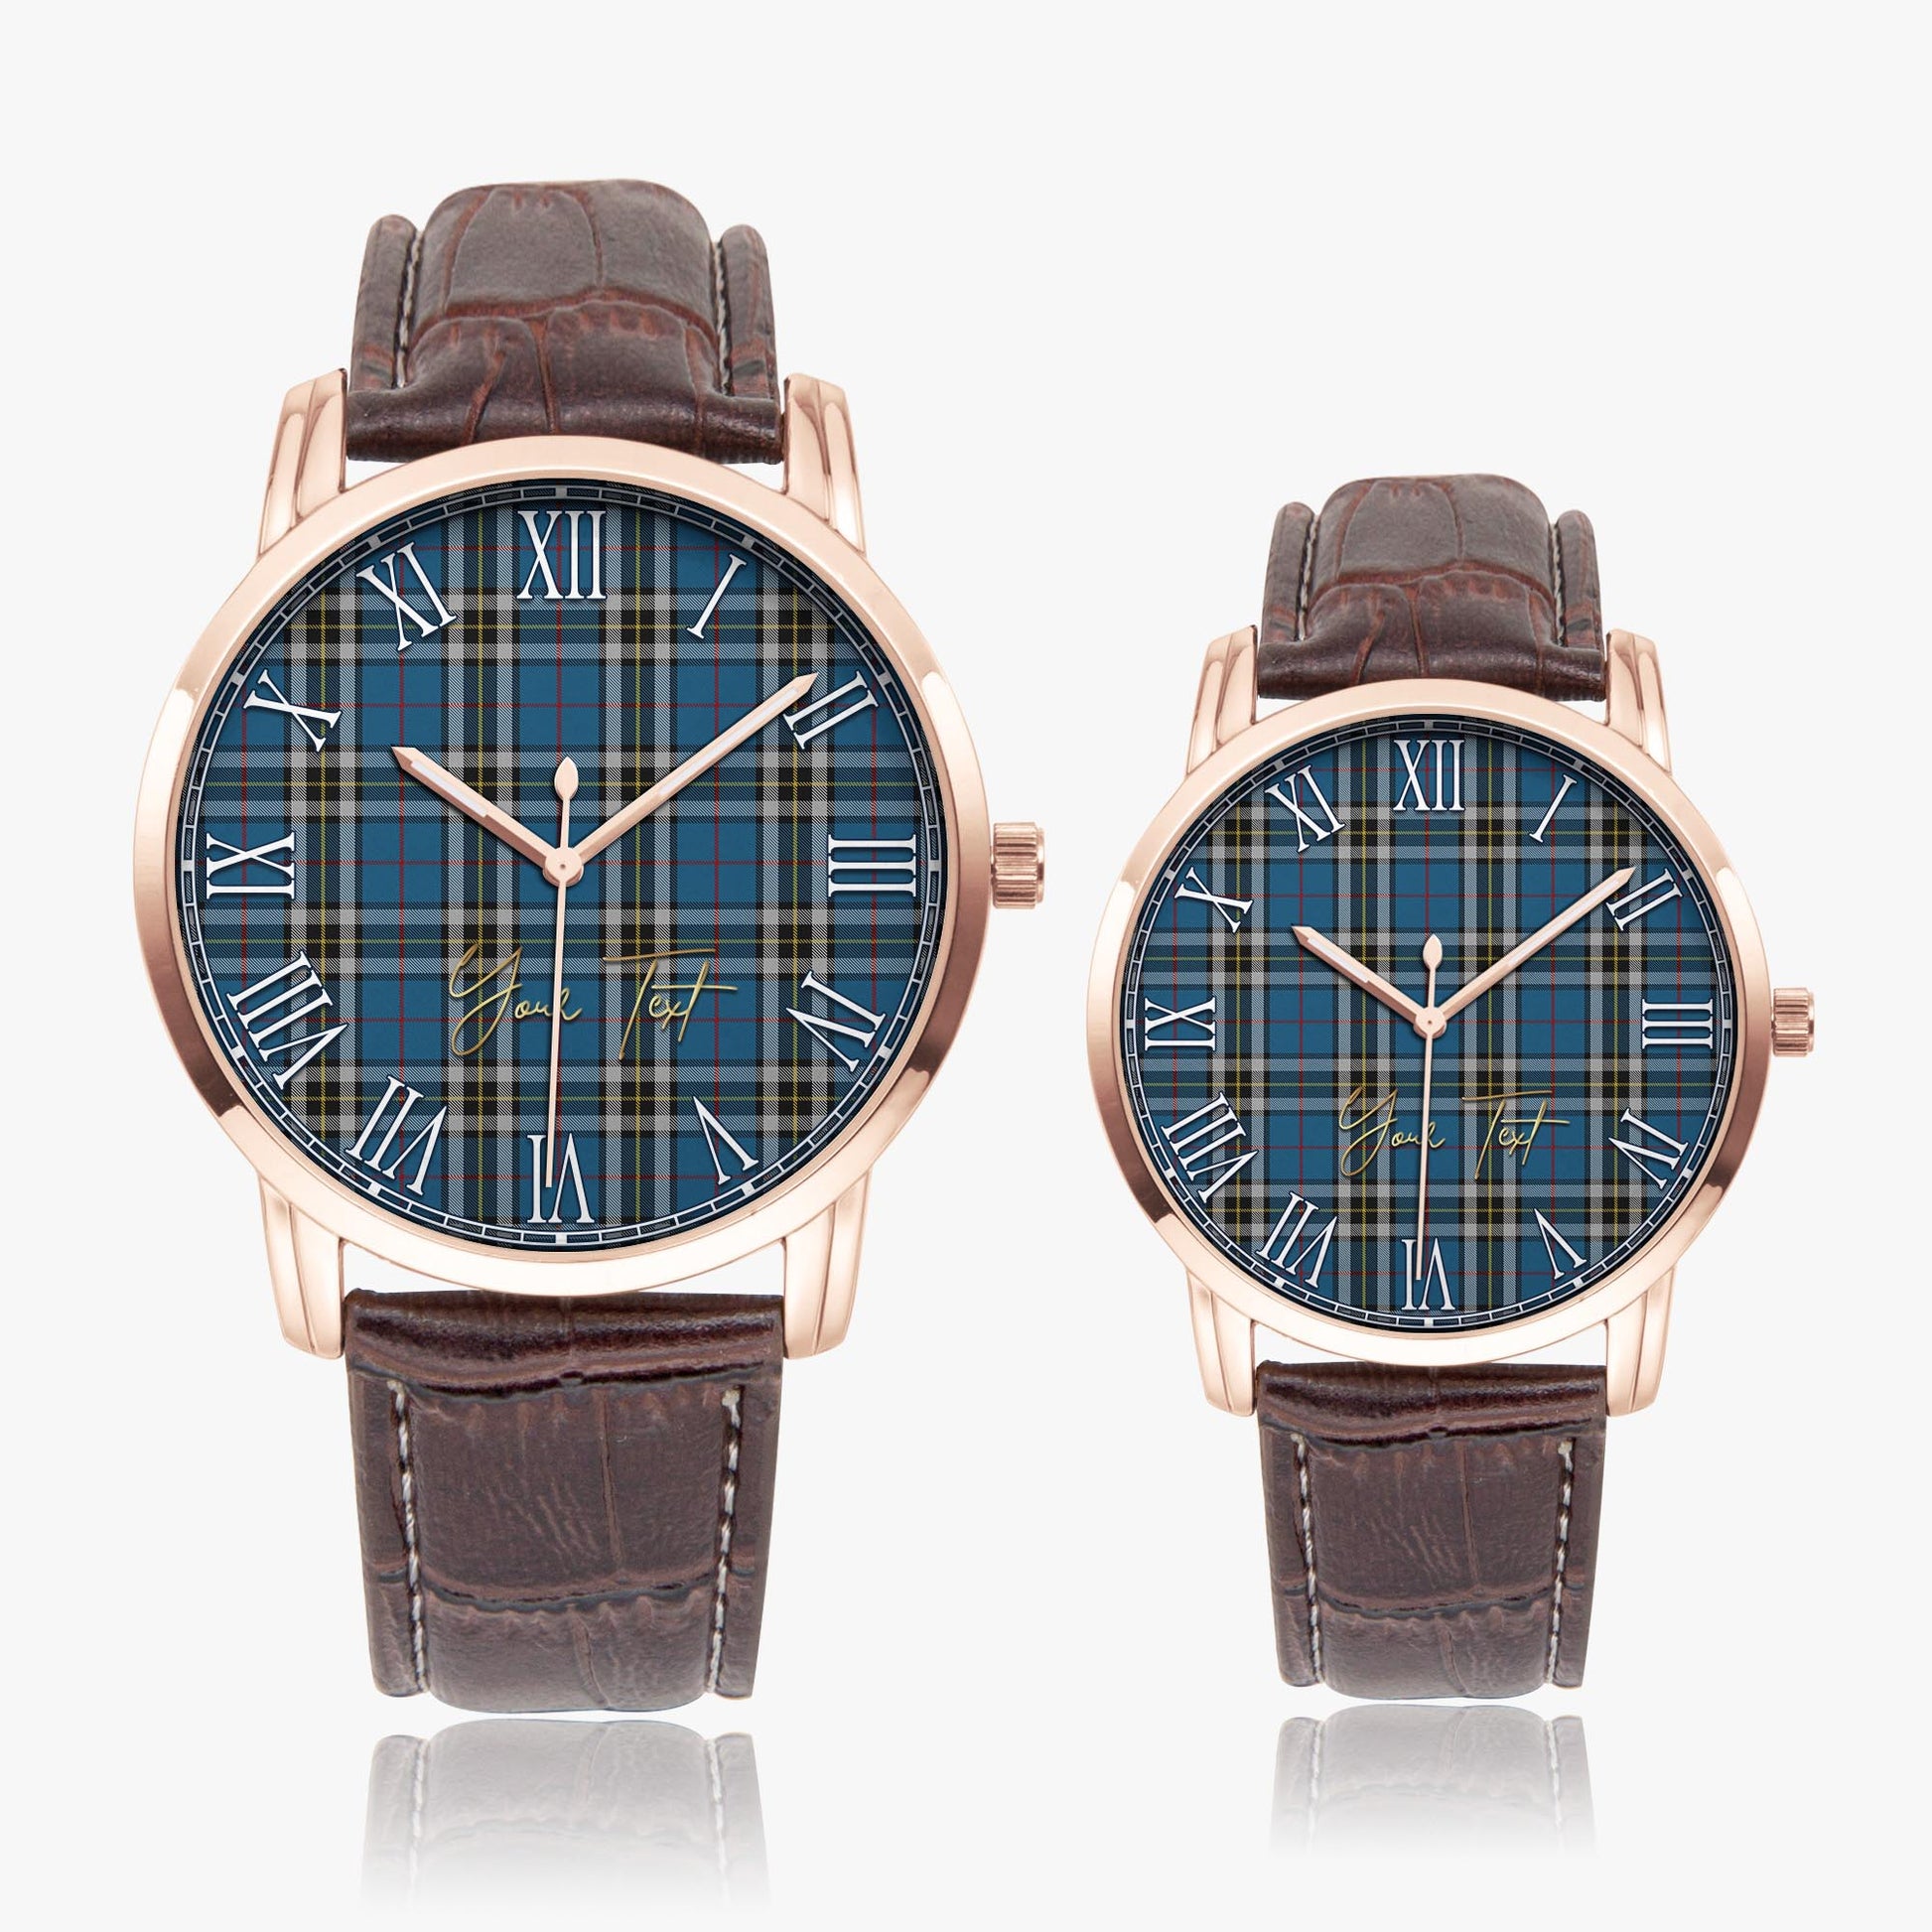 Thomson Dress Blue Tartan Personalized Your Text Leather Trap Quartz Watch Wide Type Rose Gold Case With Brown Leather Strap - Tartanvibesclothing Shop